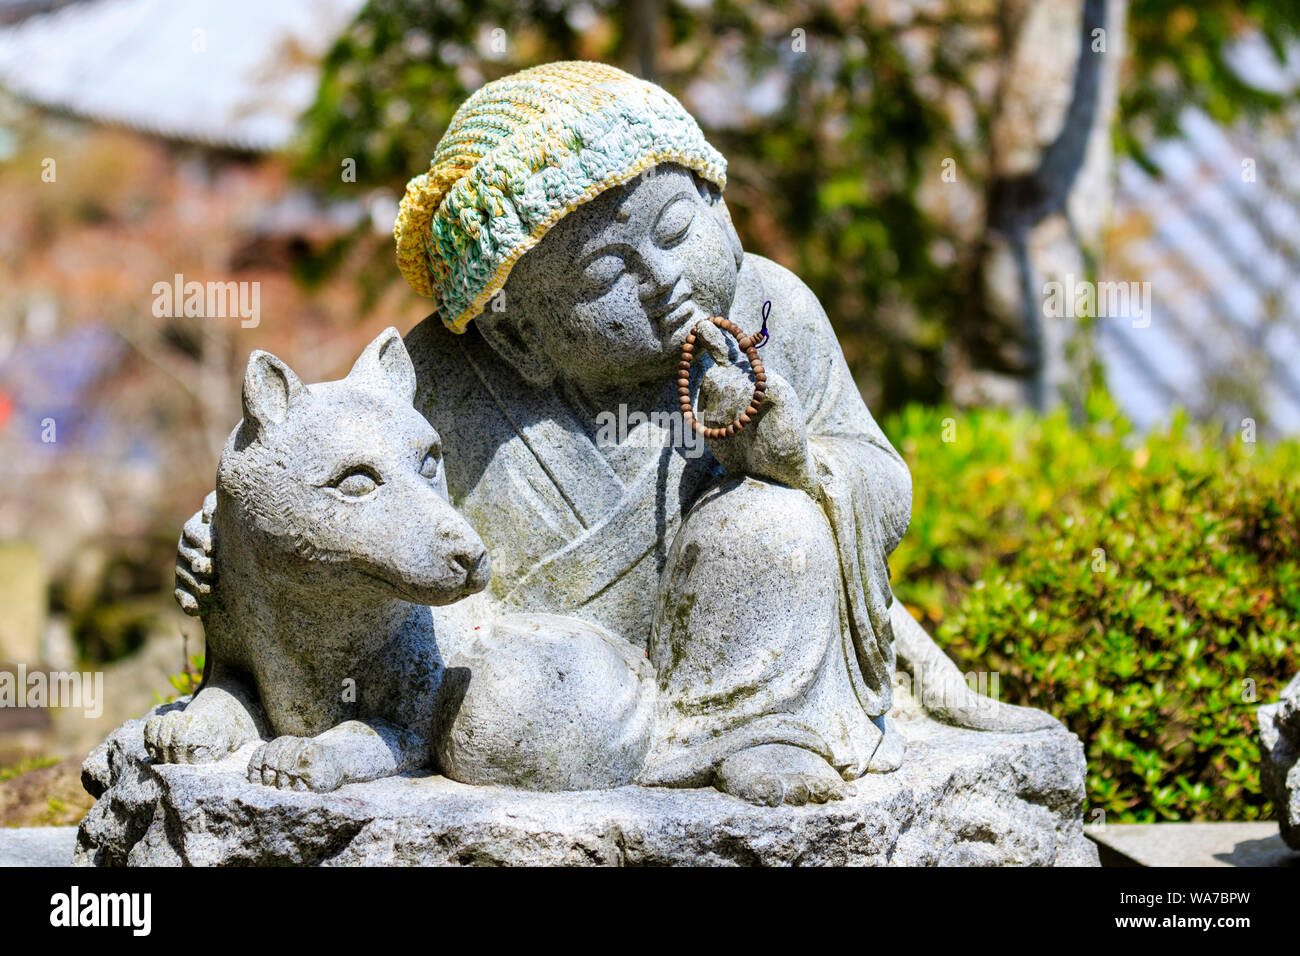 Japan, Miyajima. Daisho-in temple. Small Jizo statue of a sitting Buddhist monk in contemplation, holds a rosary in one hand and arm is around a dog. Stock Photo